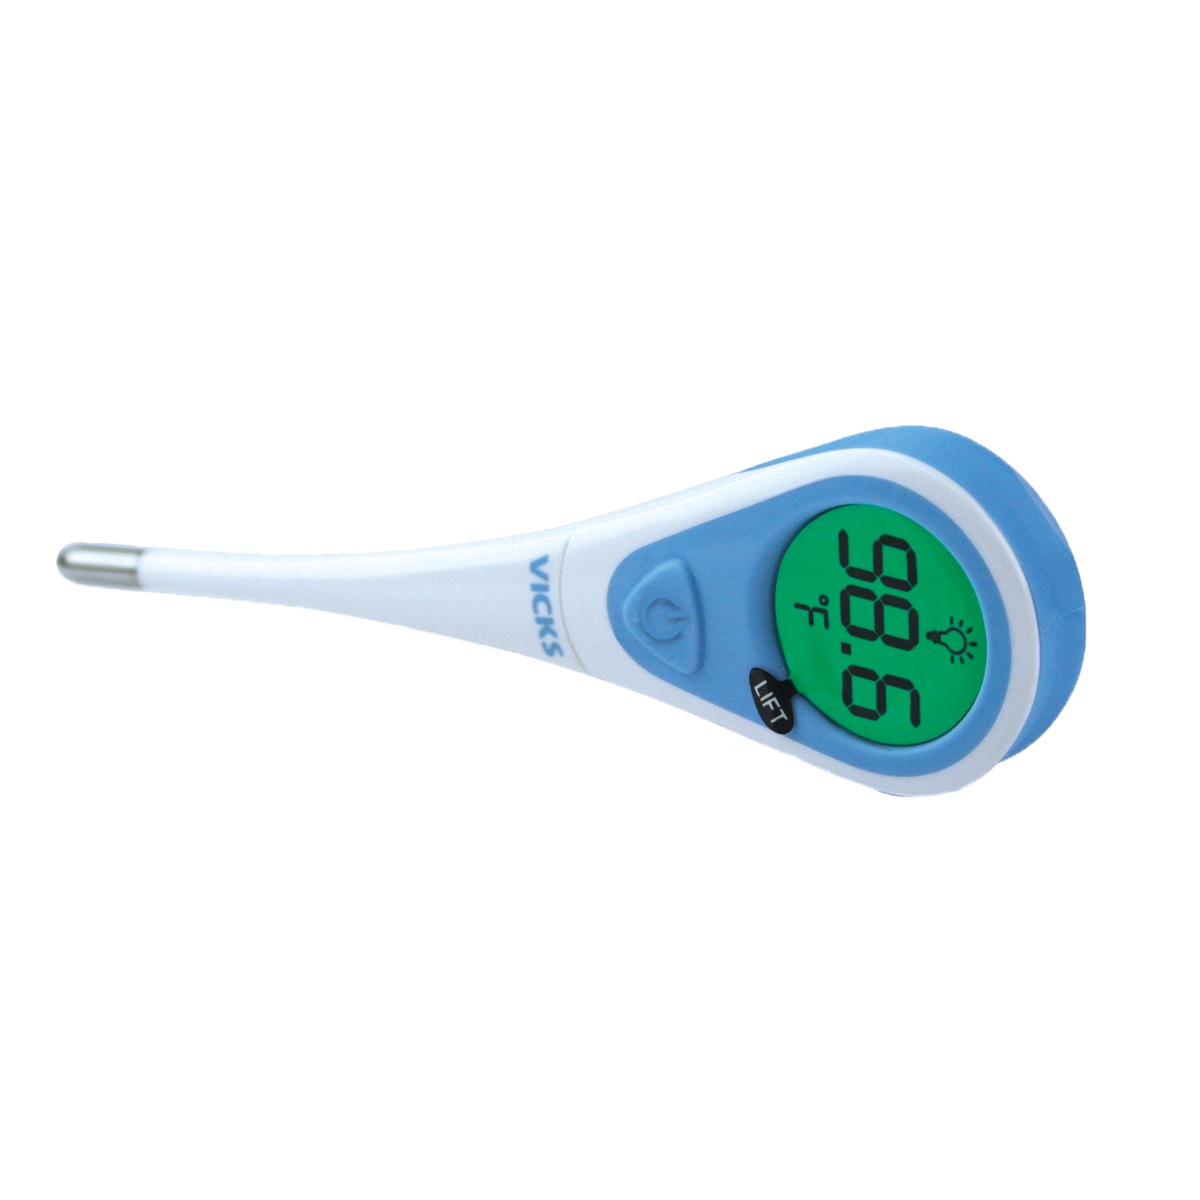 The Best Liquid Thermometer for 2023